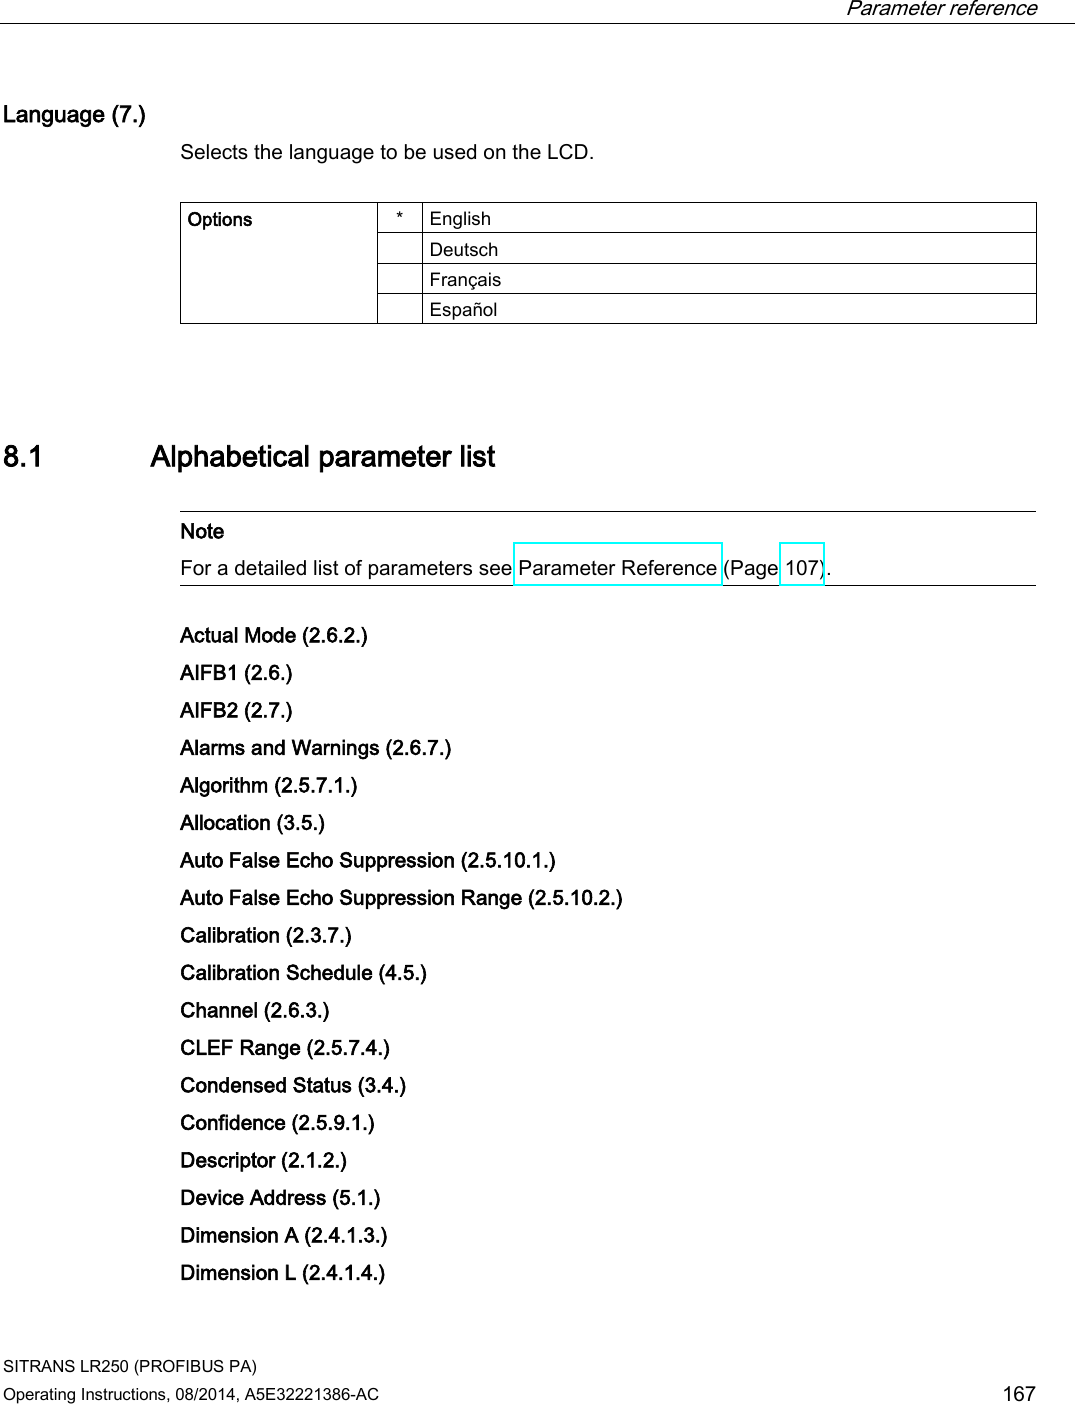  Parameter reference    SITRANS LR250 (PROFIBUS PA) Operating Instructions, 08/2014, A5E32221386-AC 167 Language (7.) Selects the language to be used on the LCD.   Options  *  English  Deutsch  Français  Español  8.1 Alphabetical parameter list   Note For a detailed list of parameters see Parameter Reference (Page 107).   Actual Mode (2.6.2.)  AIFB1 (2.6.) AIFB2 (2.7.) Alarms and Warnings (2.6.7.) Algorithm (2.5.7.1.) Allocation (3.5.)  Auto False Echo Suppression (2.5.10.1.)  Auto False Echo Suppression Range (2.5.10.2.) Calibration (2.3.7.)  Calibration Schedule (4.5.) Channel (2.6.3.)  CLEF Range (2.5.7.4.)  Condensed Status (3.4.)  Confidence (2.5.9.1.) Descriptor (2.1.2.)  Device Address (5.1.)  Dimension A (2.4.1.3.)  Dimension L (2.4.1.4.) 